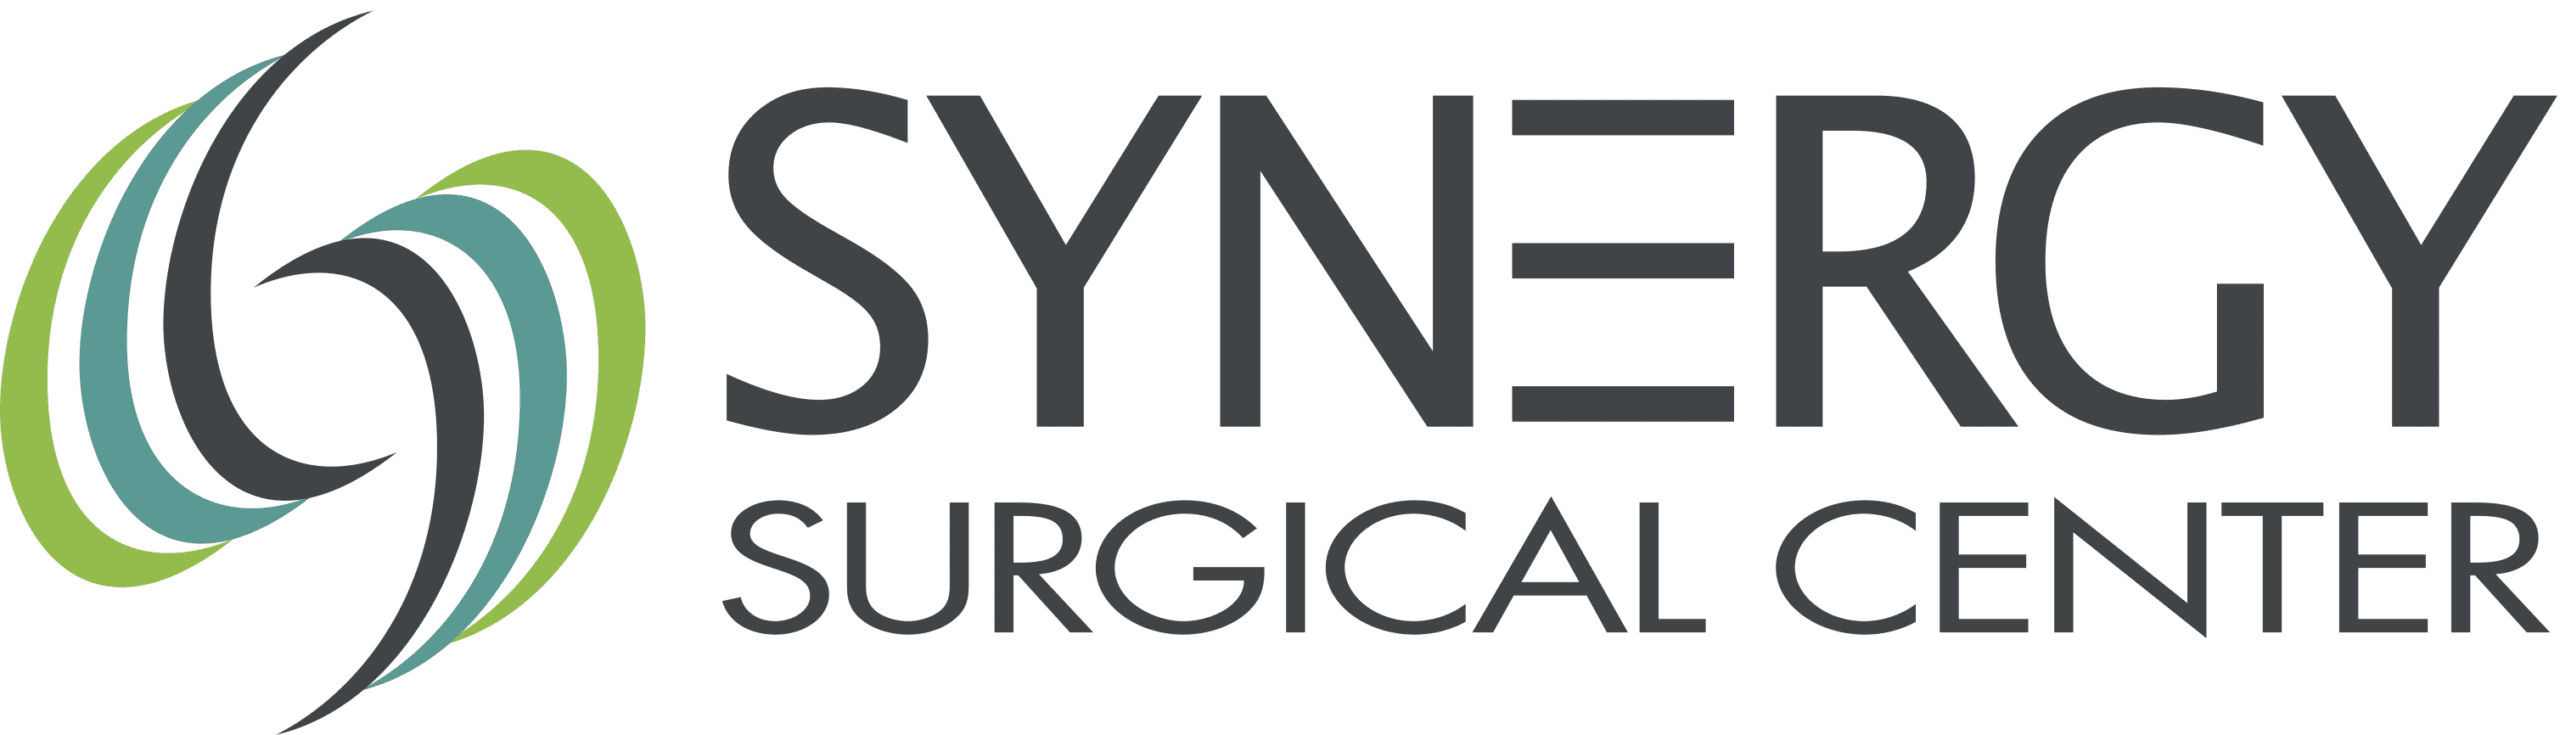 Synergy Surgical Center